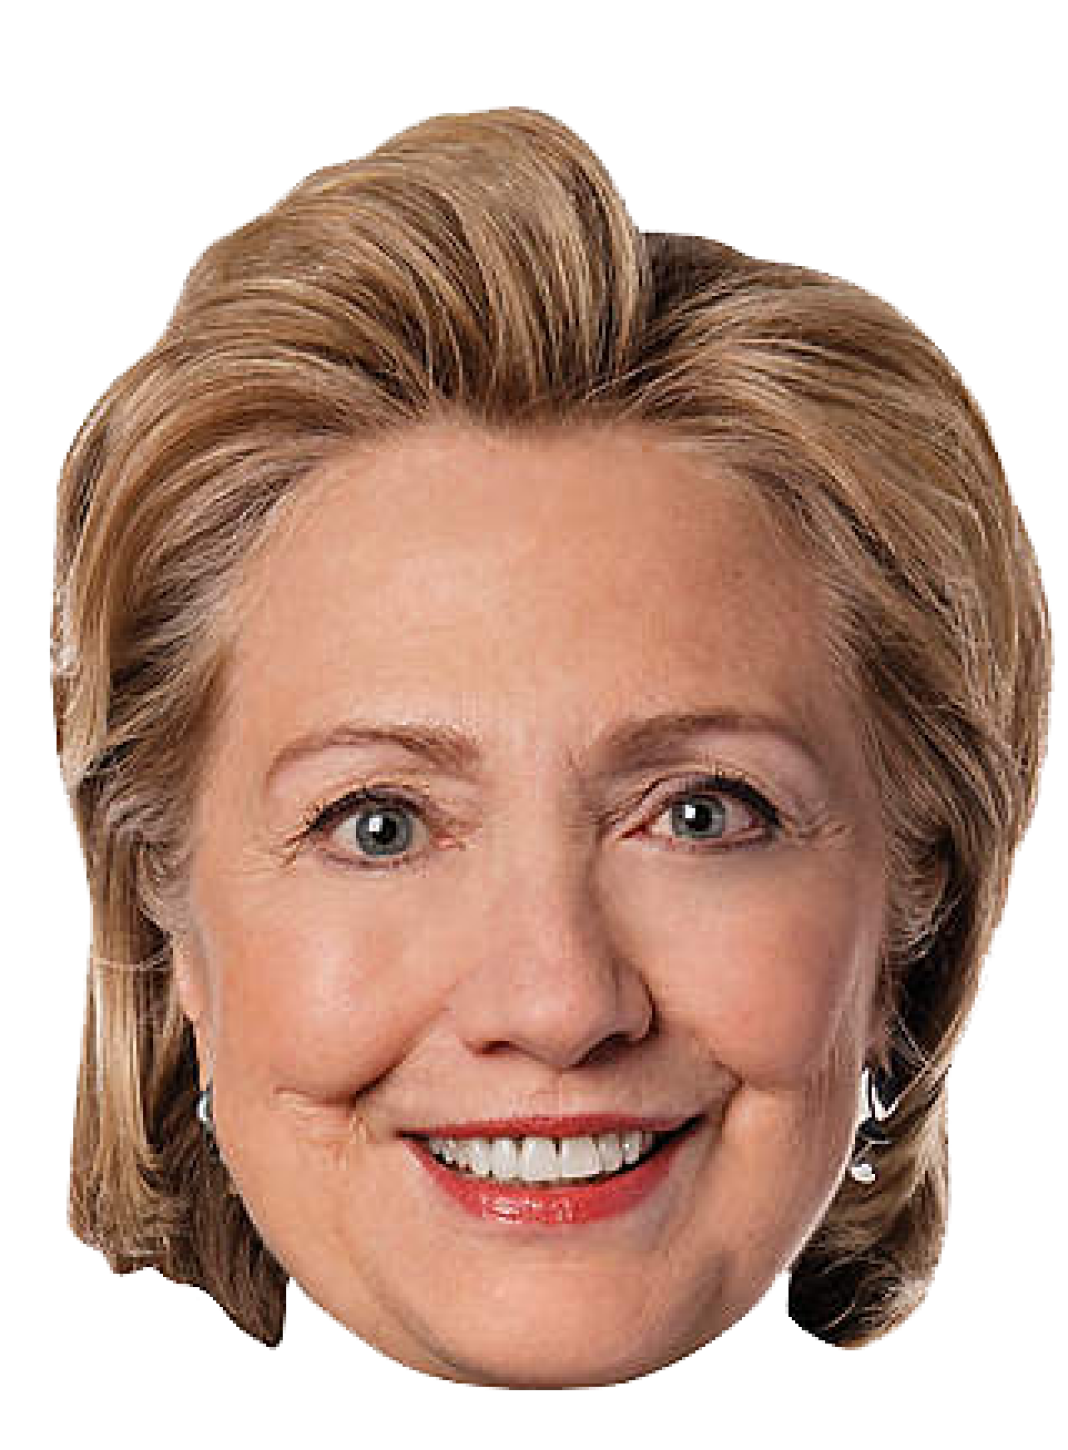 Hair United Clinton Trump Face States Hillary PNG Image